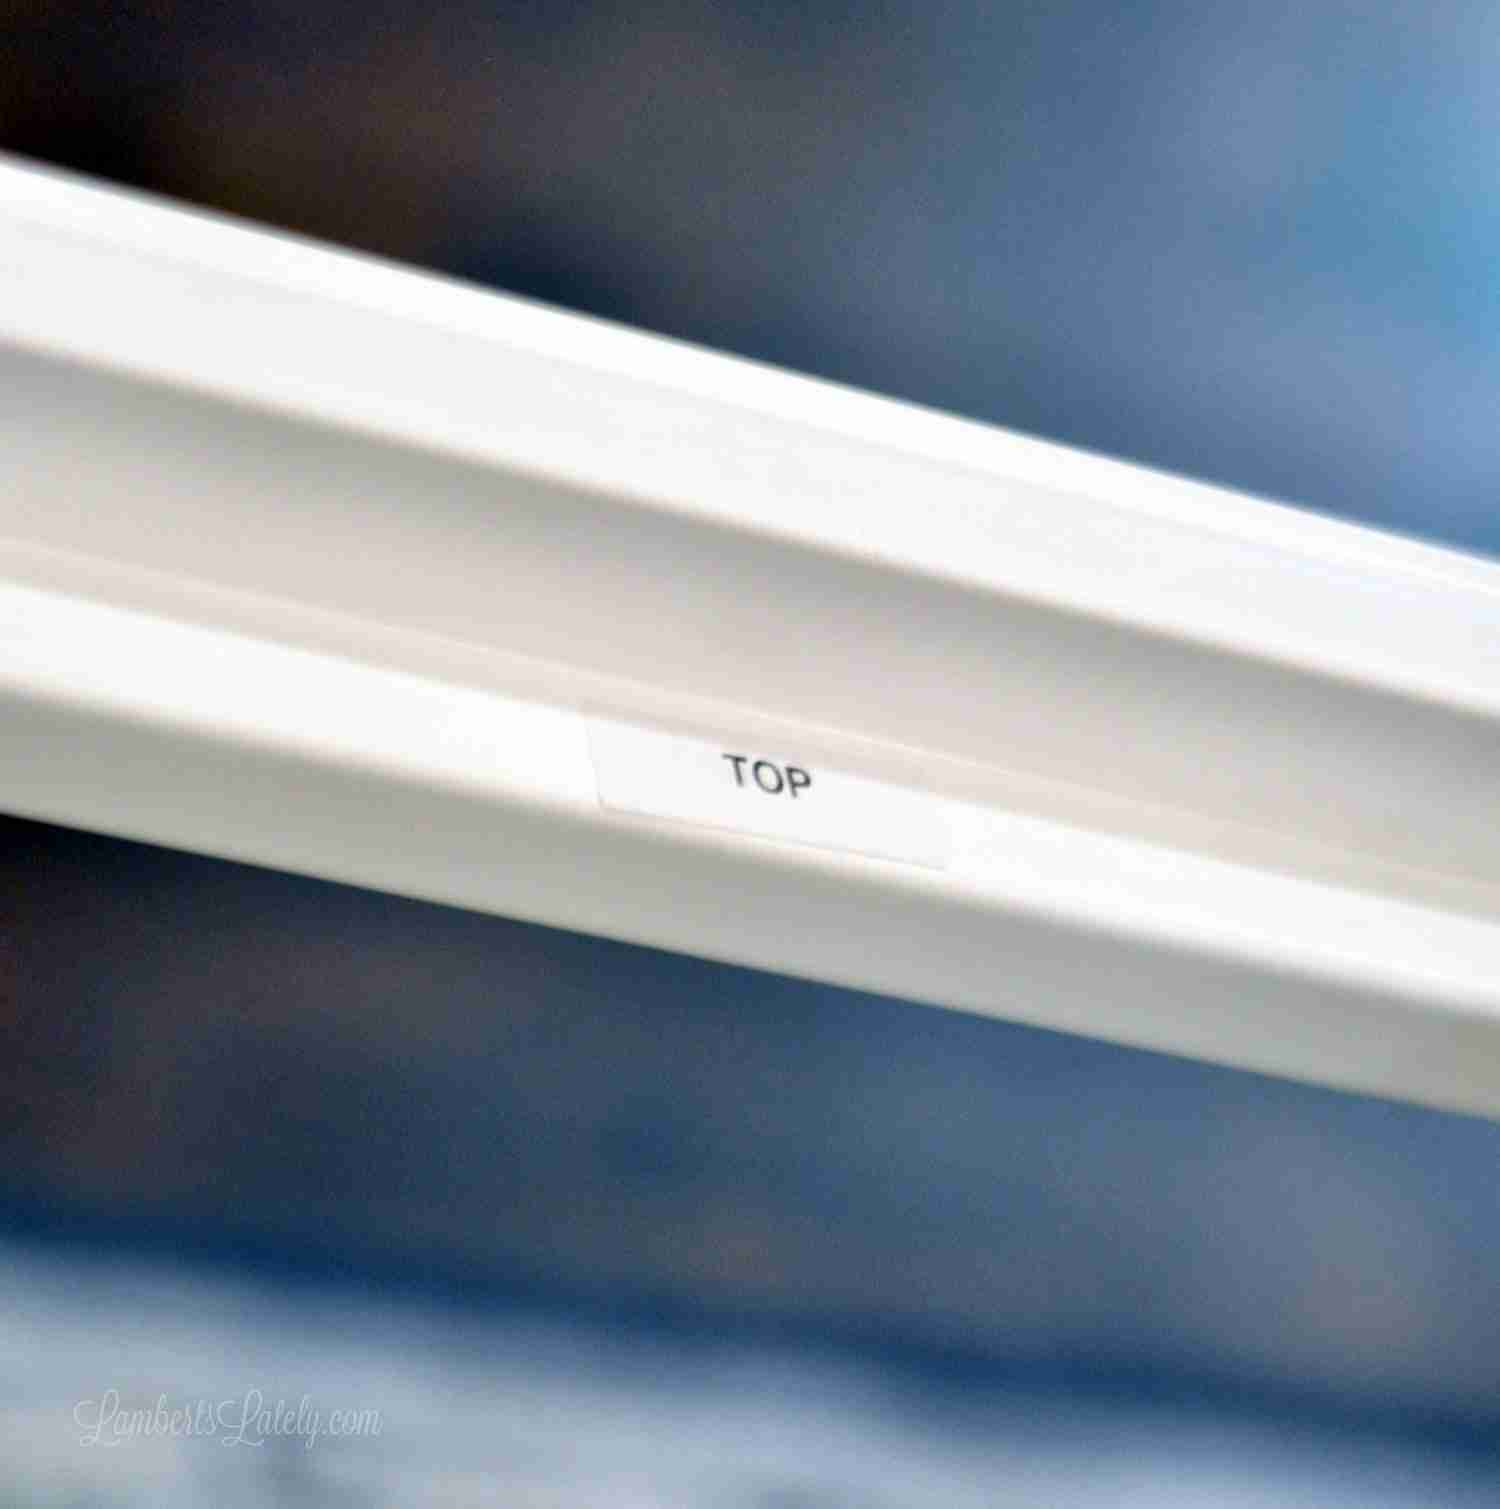 sticker showing top of blinds frame.